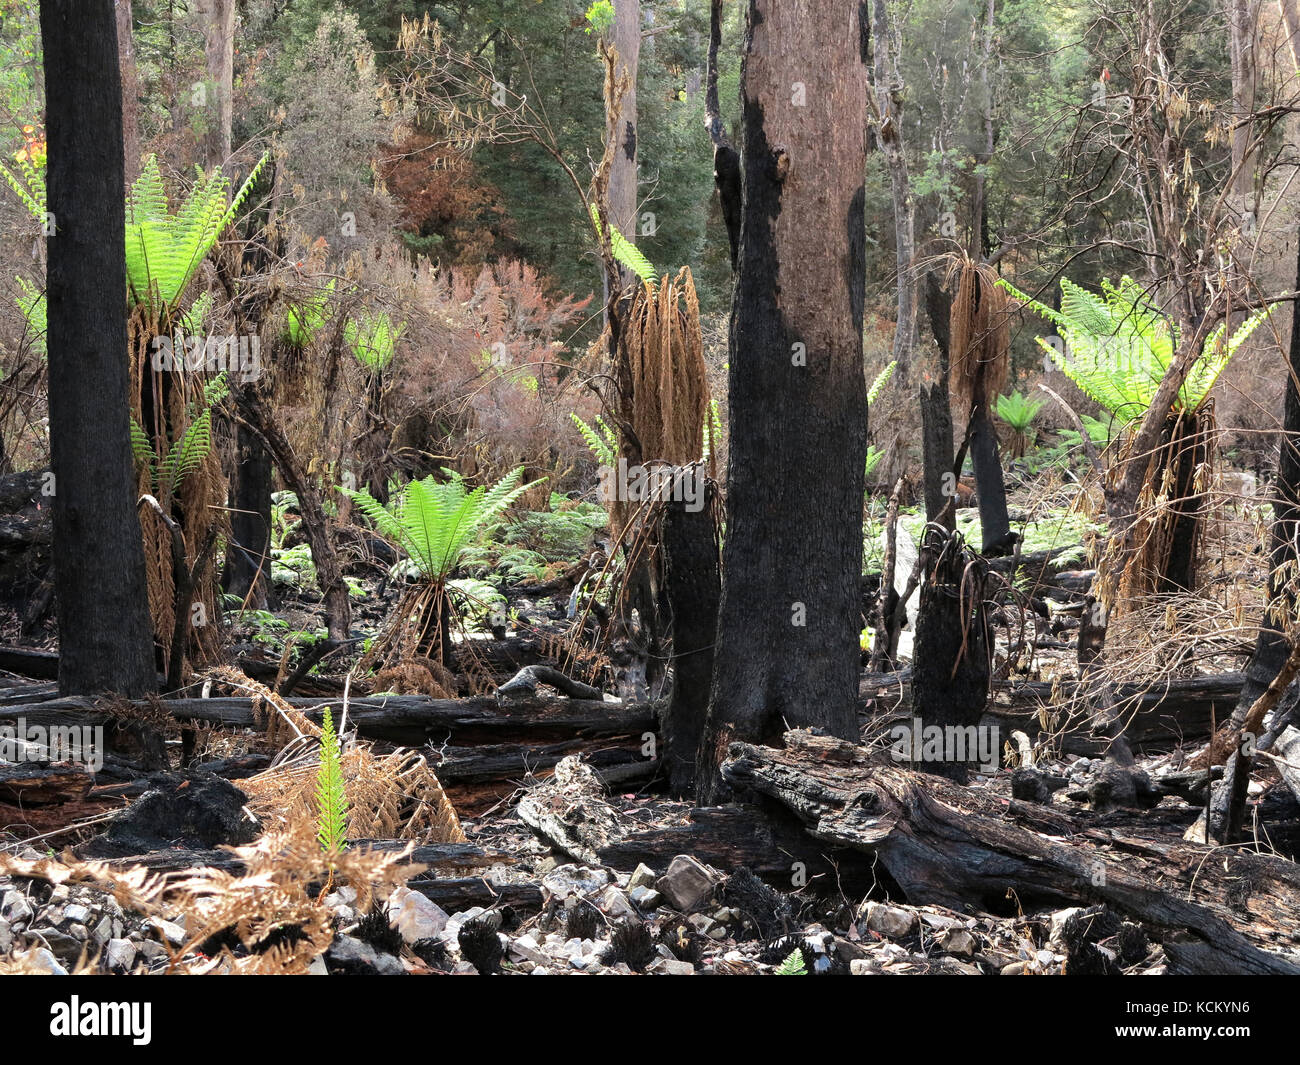 Regeneration apparent about two months after the catastrophic bushfires. Upper Mersey River valley, northwest Tasmania, Australia Stock Photo